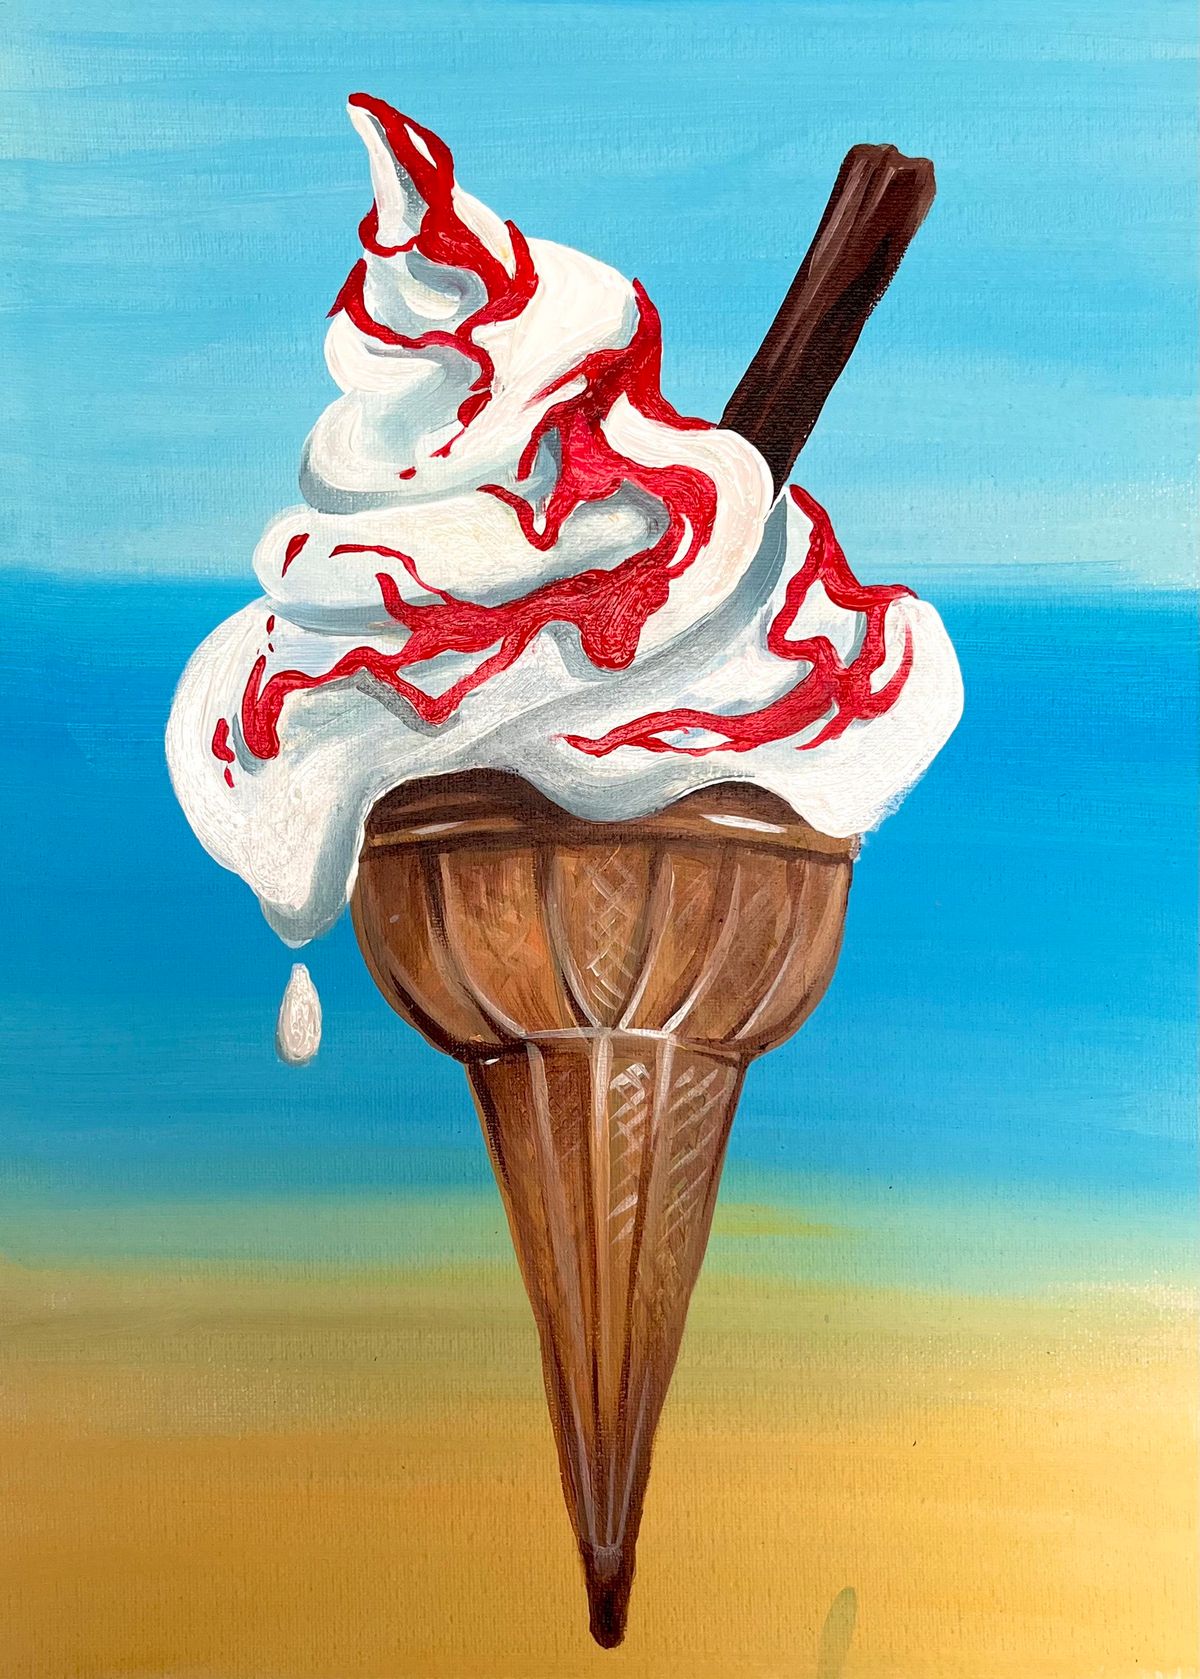 Join Brush Party in High Wycombe for a family event to paint 'Ice Cream' 